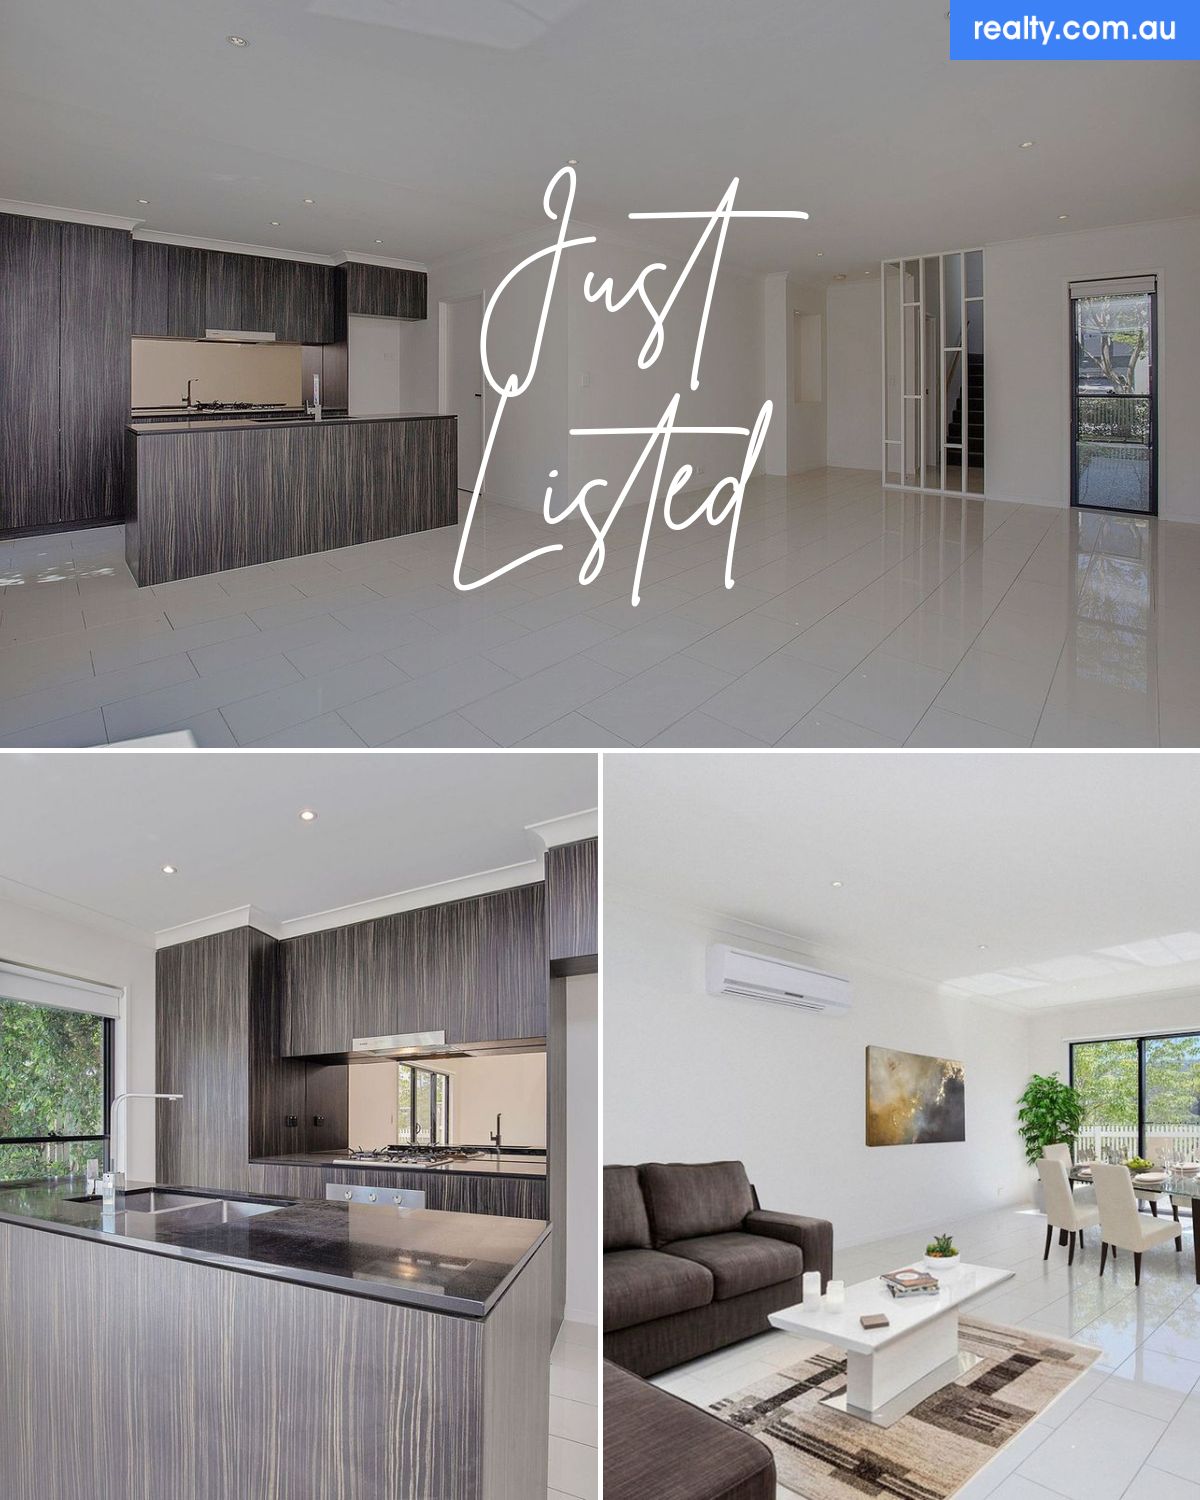 22/14 Norris Street, Pacific Pines, QLD 4211 | Realty.com.au